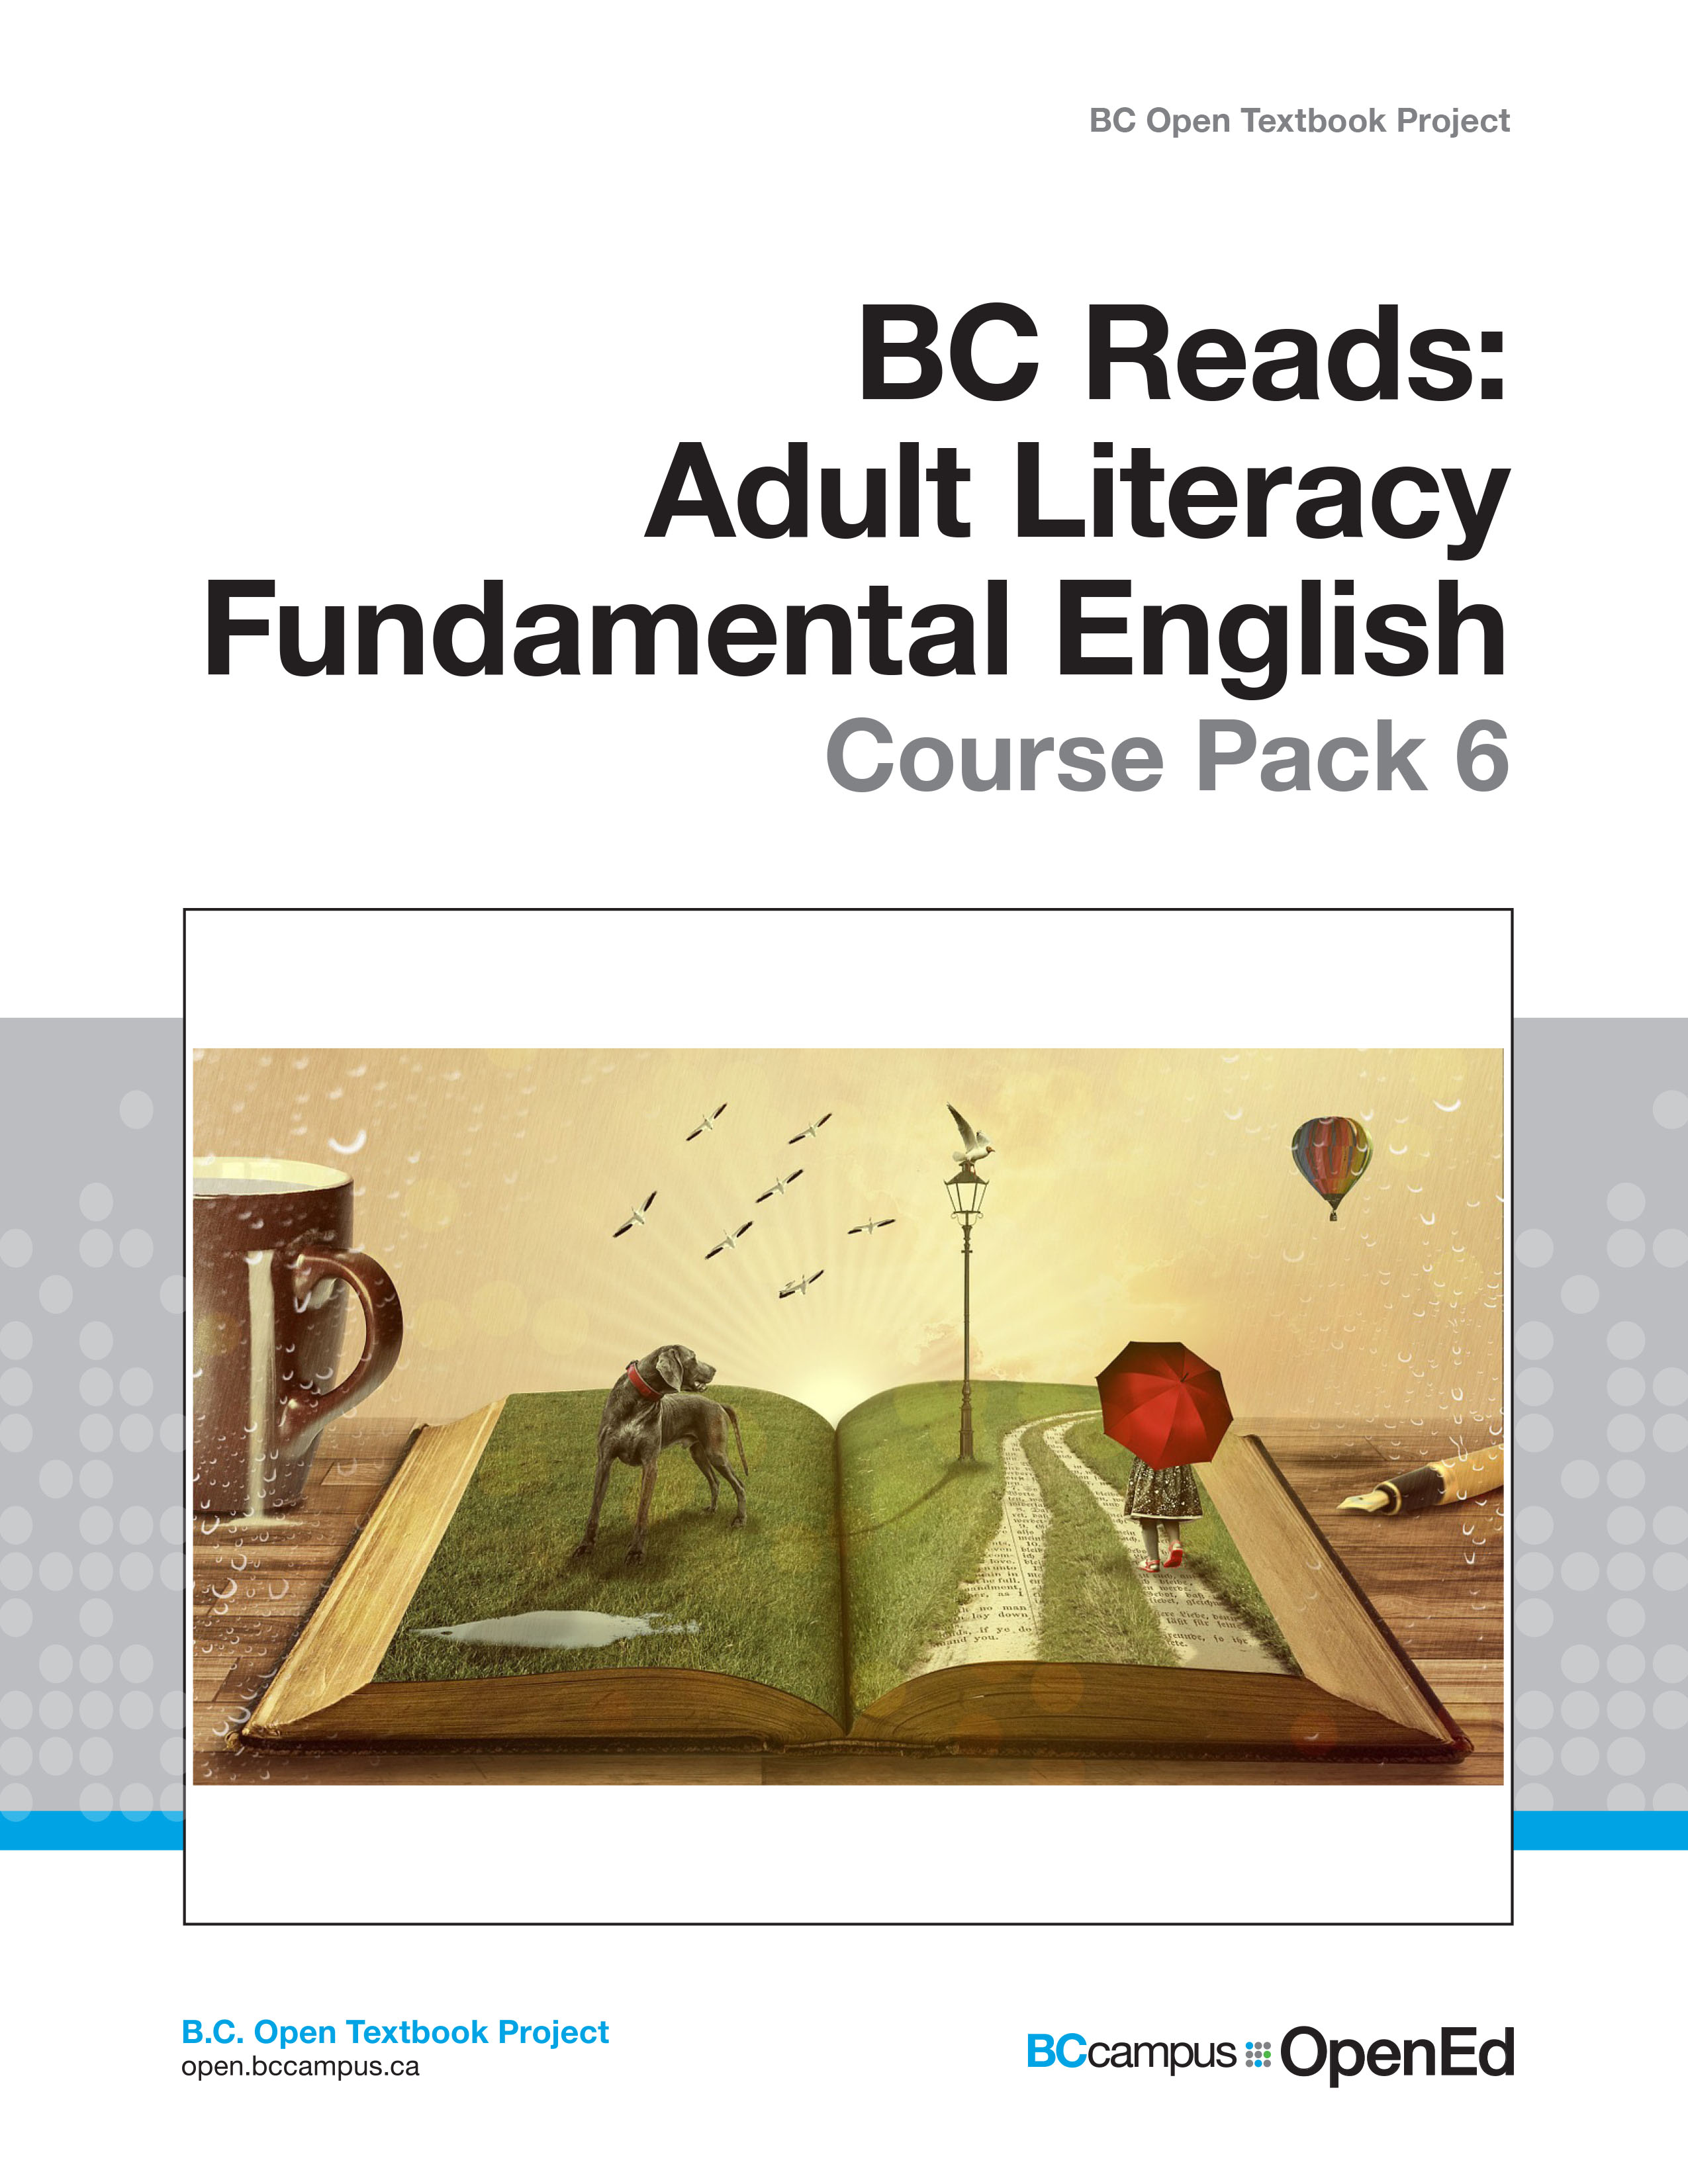 Cover image for Adult Literacy Fundamental English - Course Pack 6